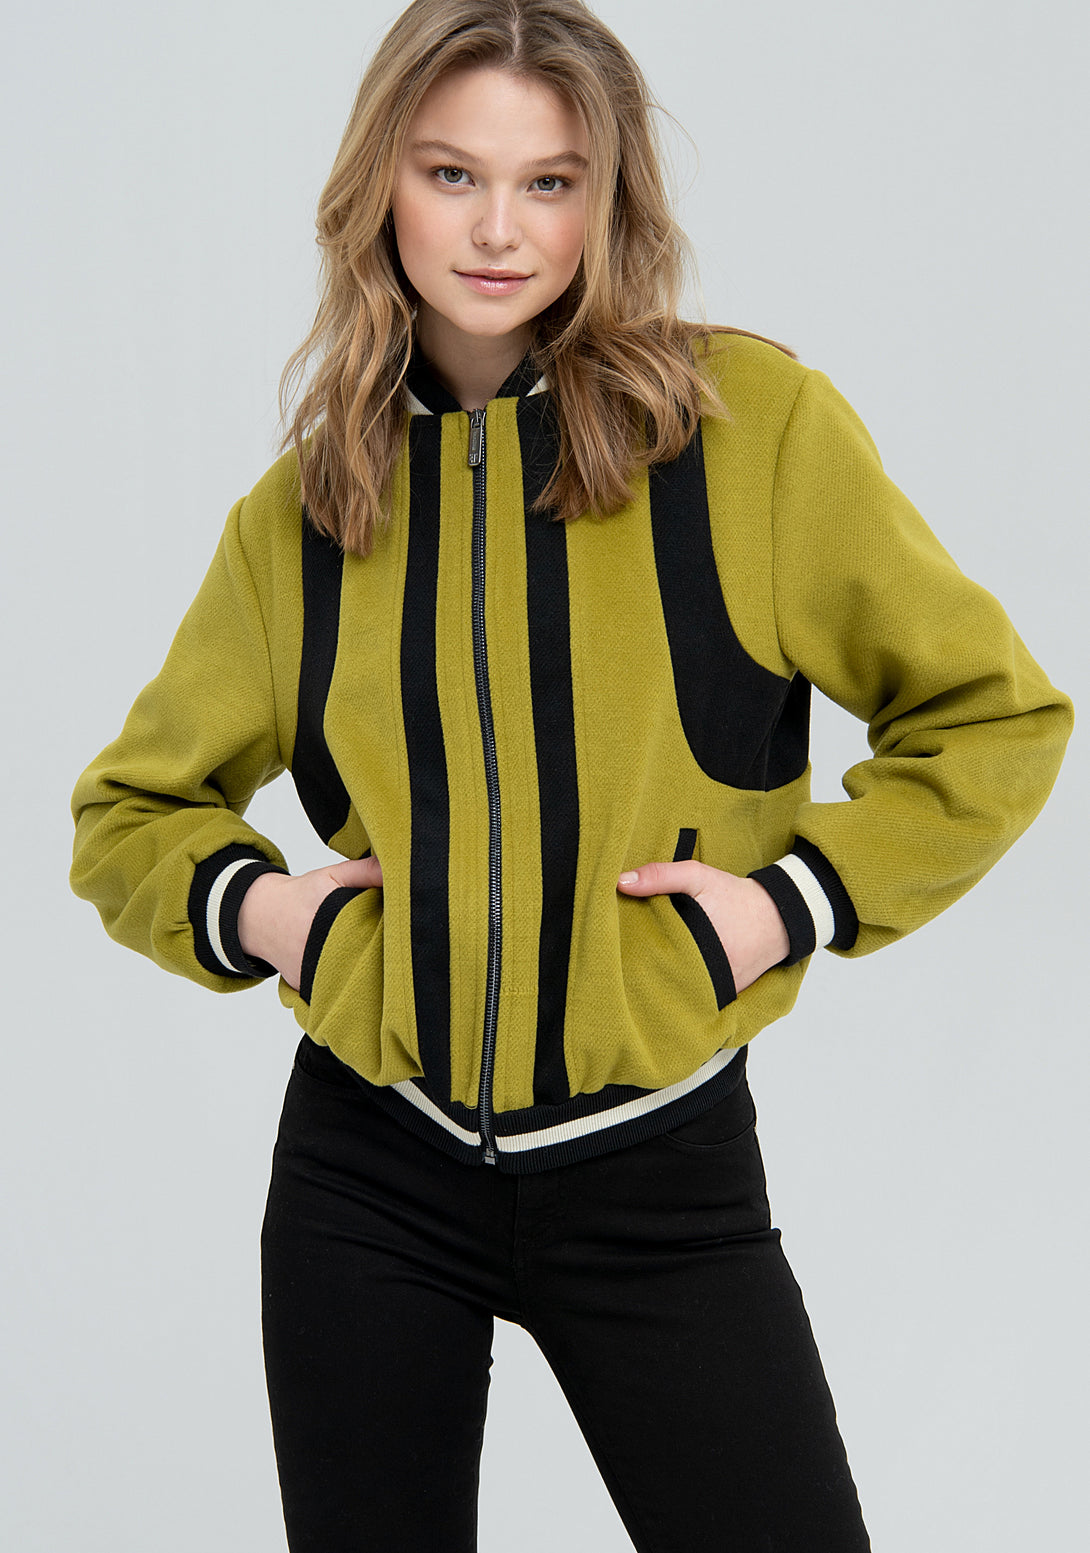 Bomber jacket over fit made in mixed fabrics